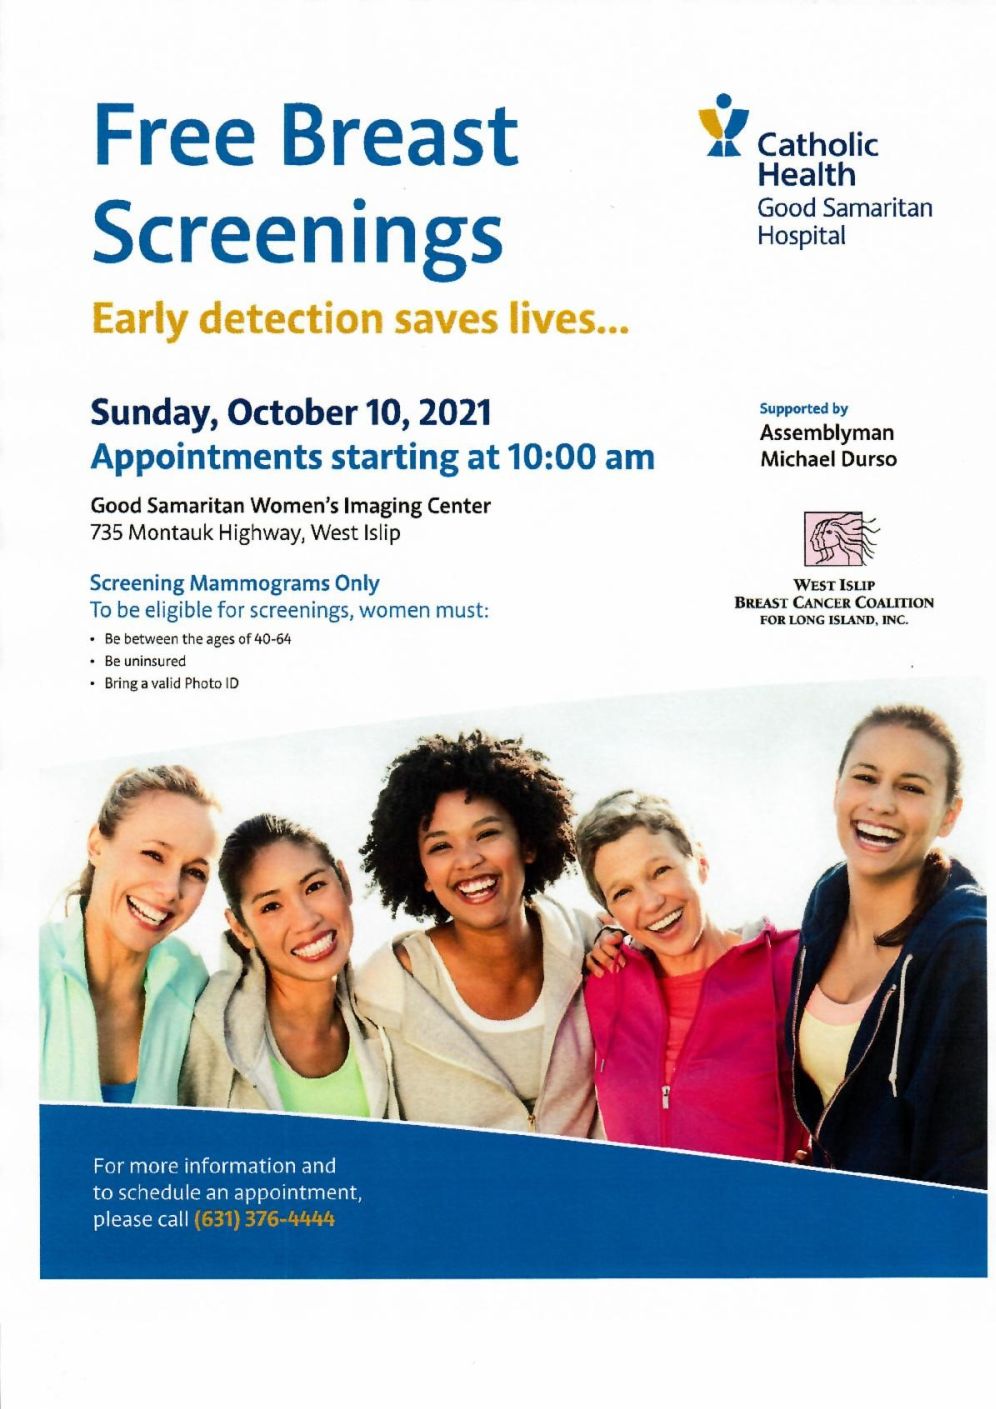 english flyer for breast cancer screenings starting at 10am on 10/10 at Good Sam Women's Imaging Center